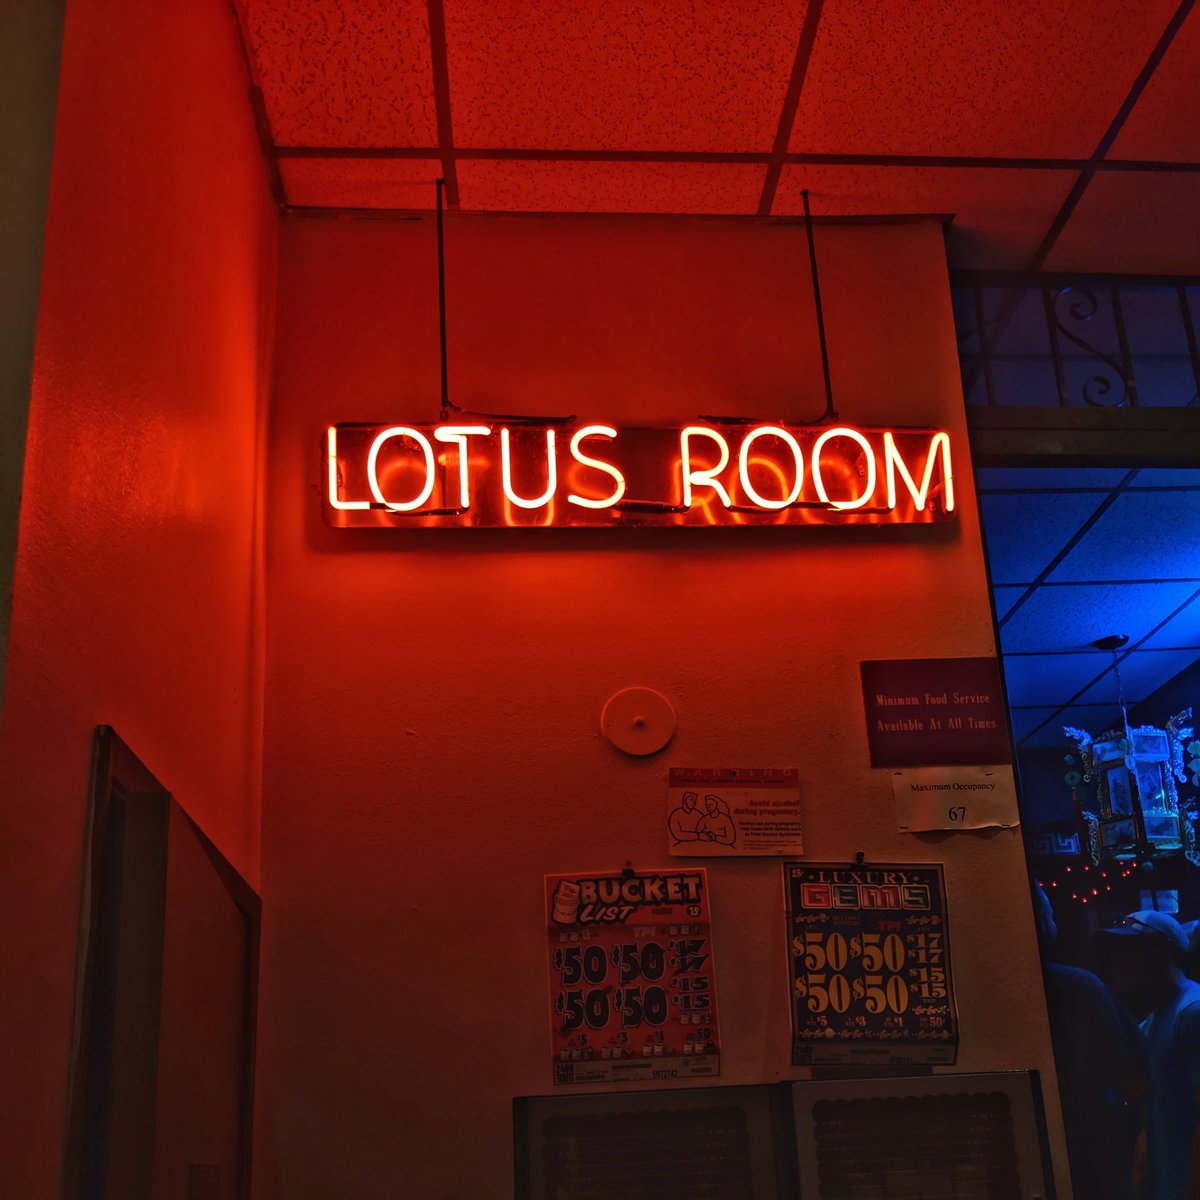 Finally made my first visit to The Lotus Room. It did not disappoint. #Yakima #LocalHotSpot